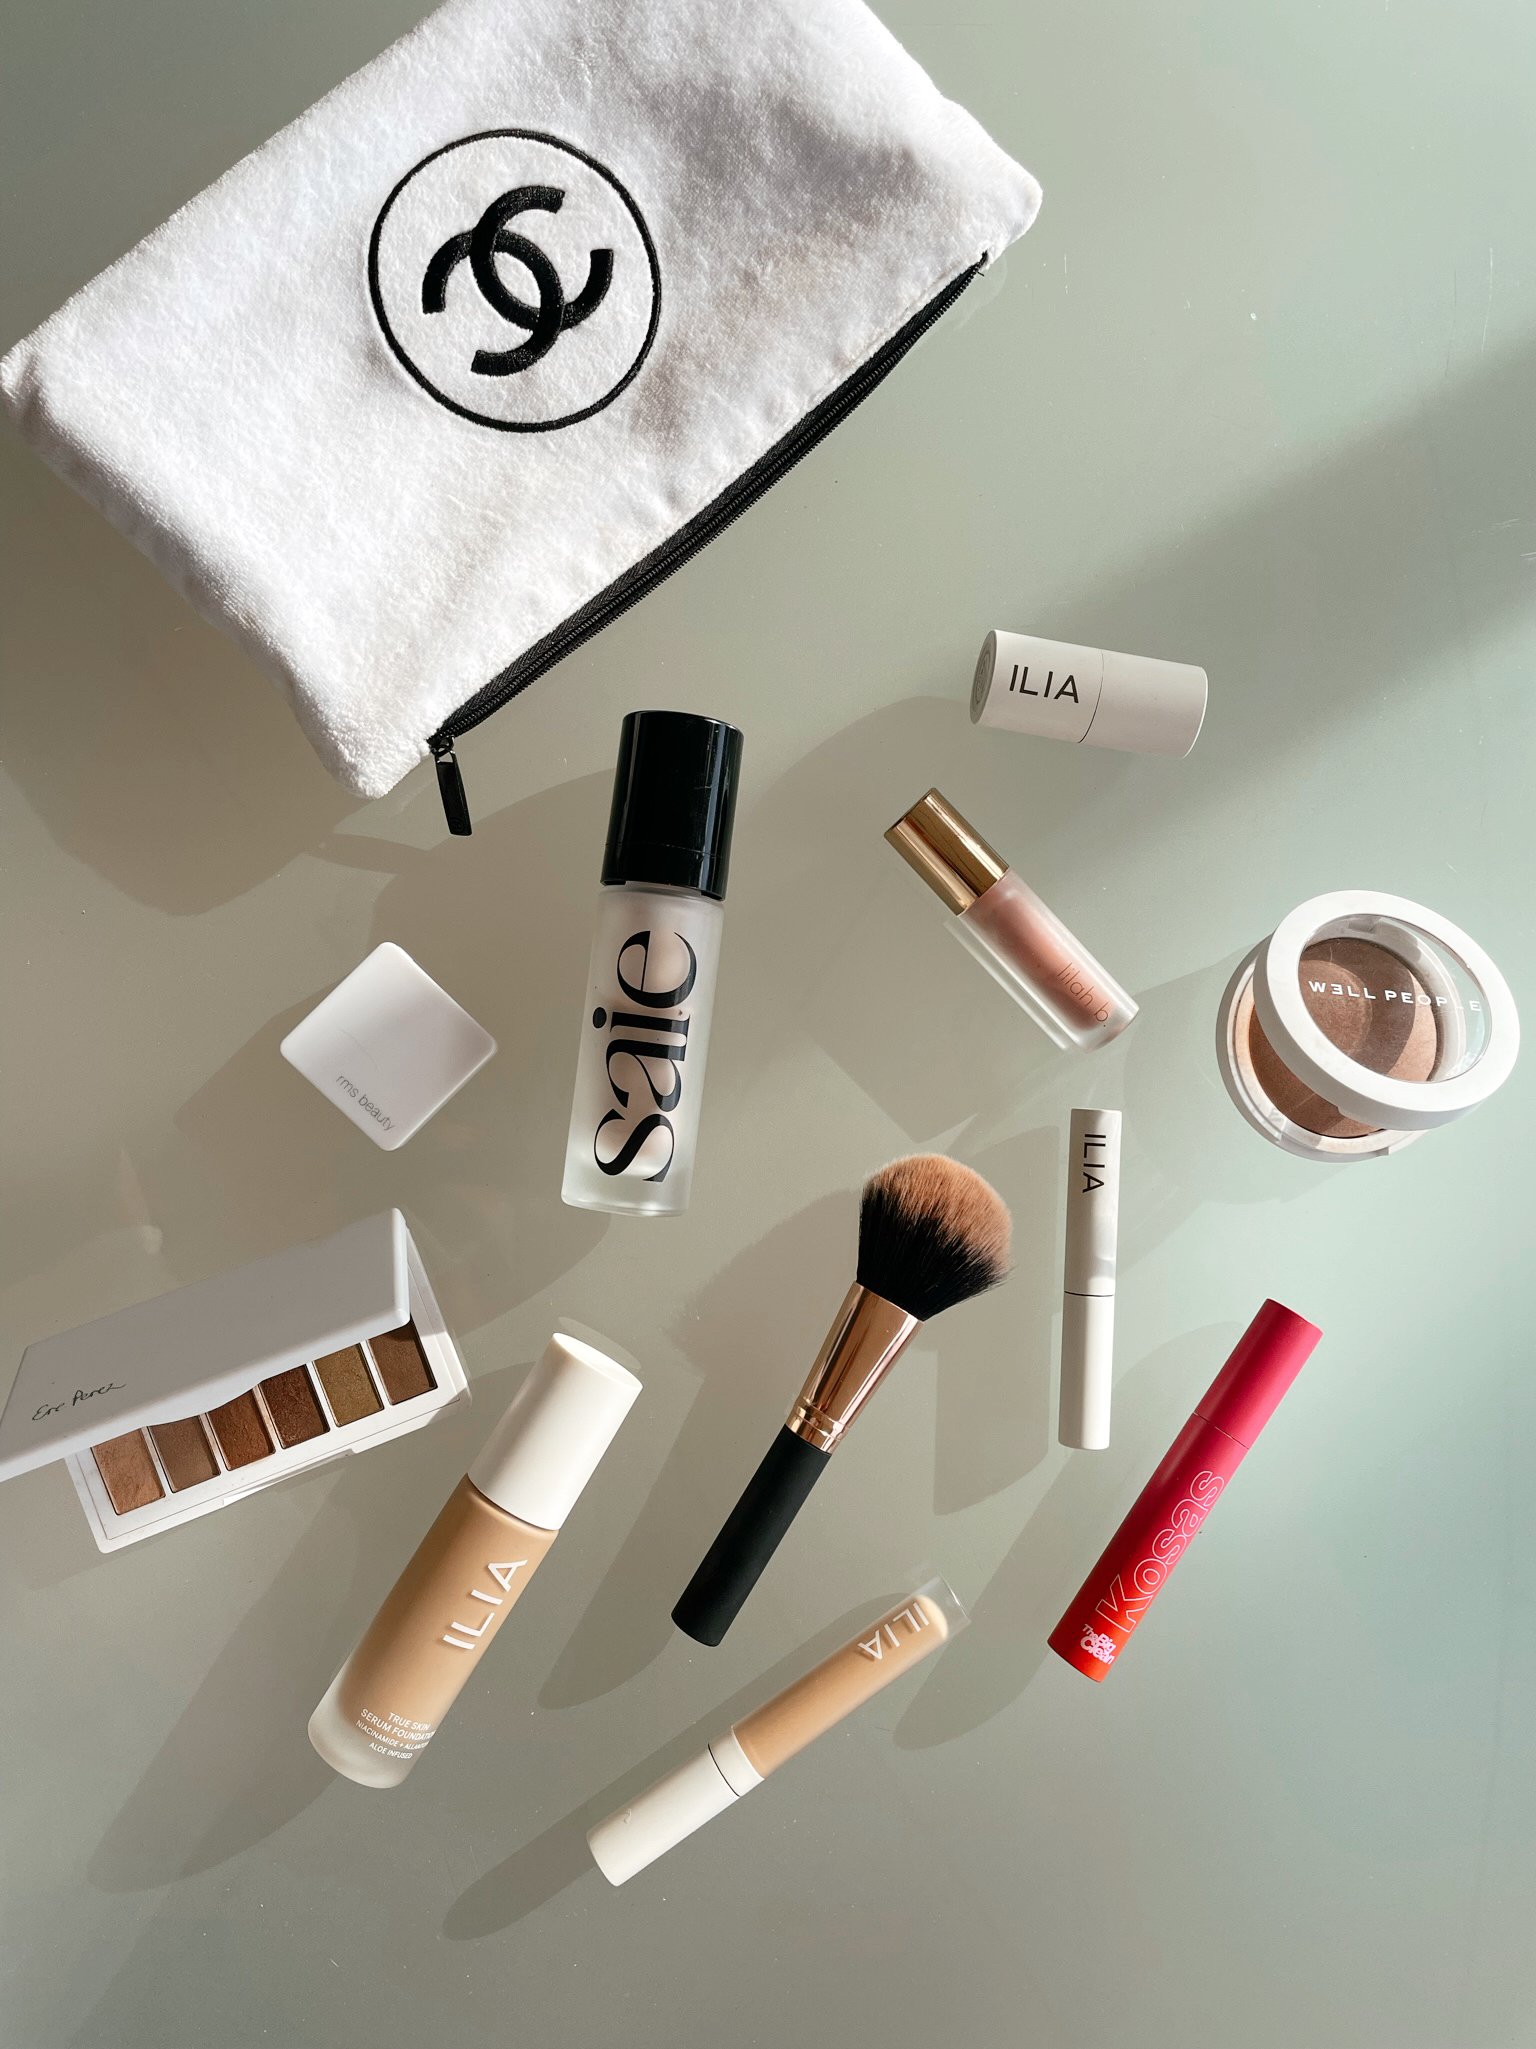 CHANEL HYDRA BEAUTY SKINCARE LINE REVIEW 